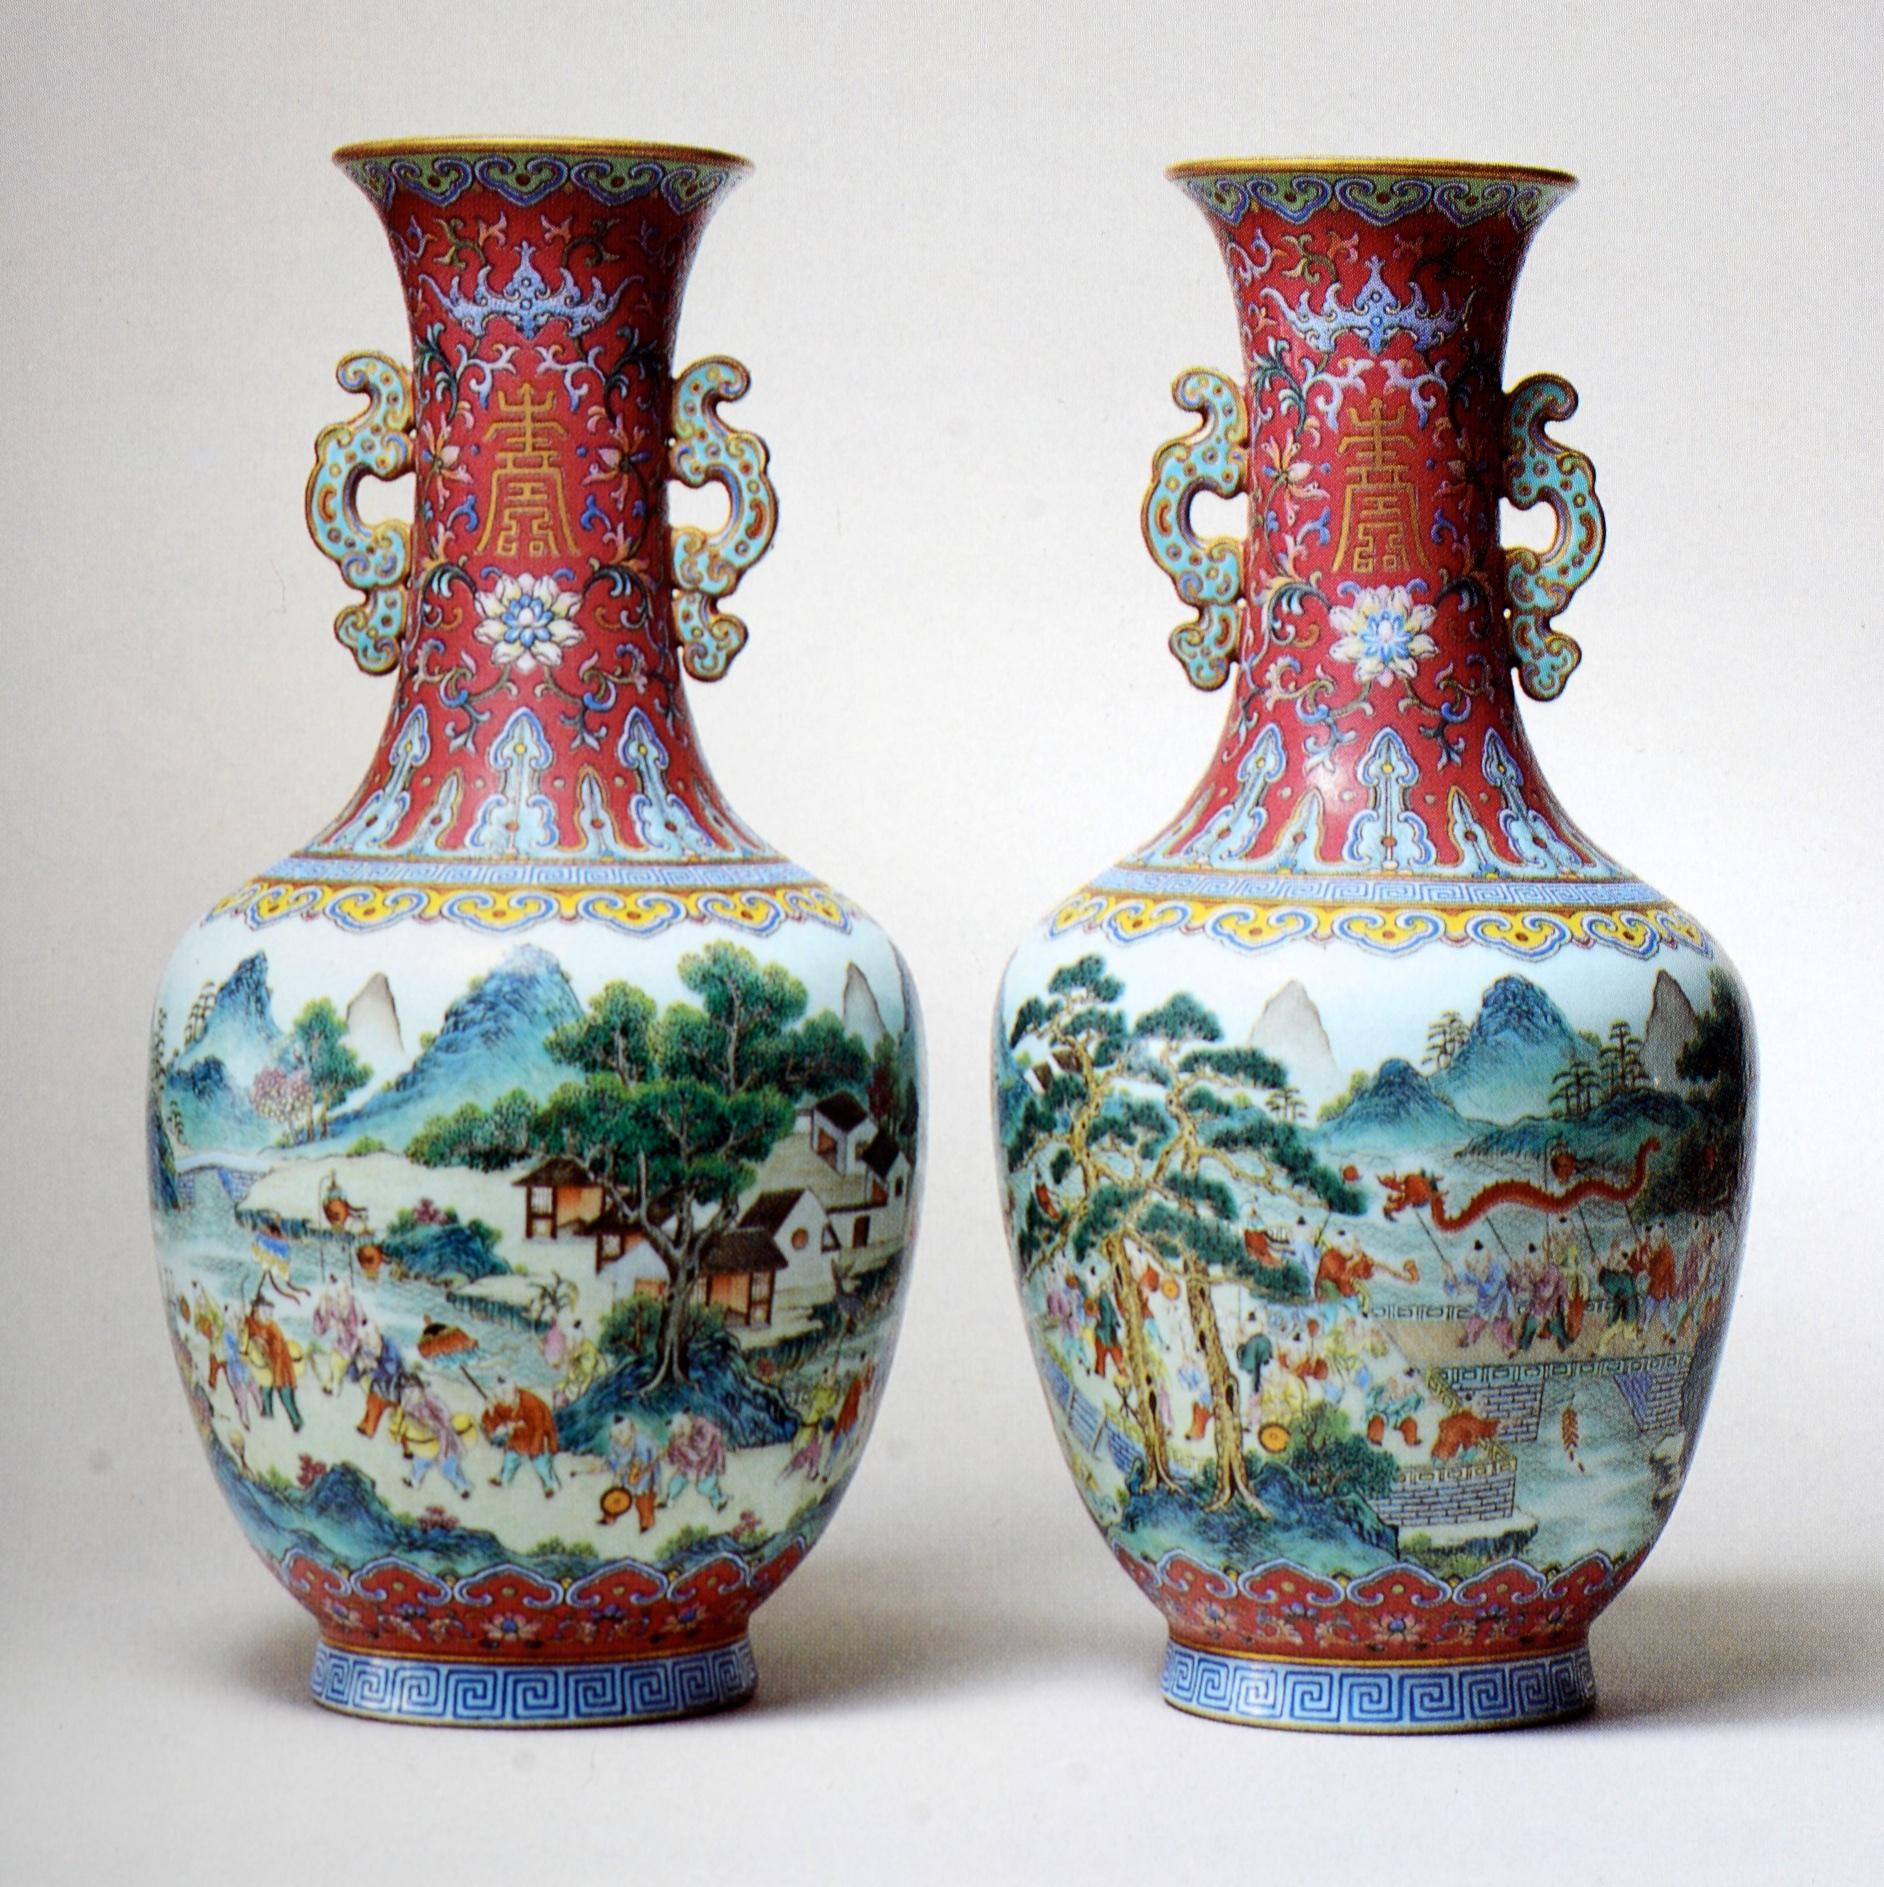 Sotheby's Important Chinese Ceramics from the J. M. Hu Family ...